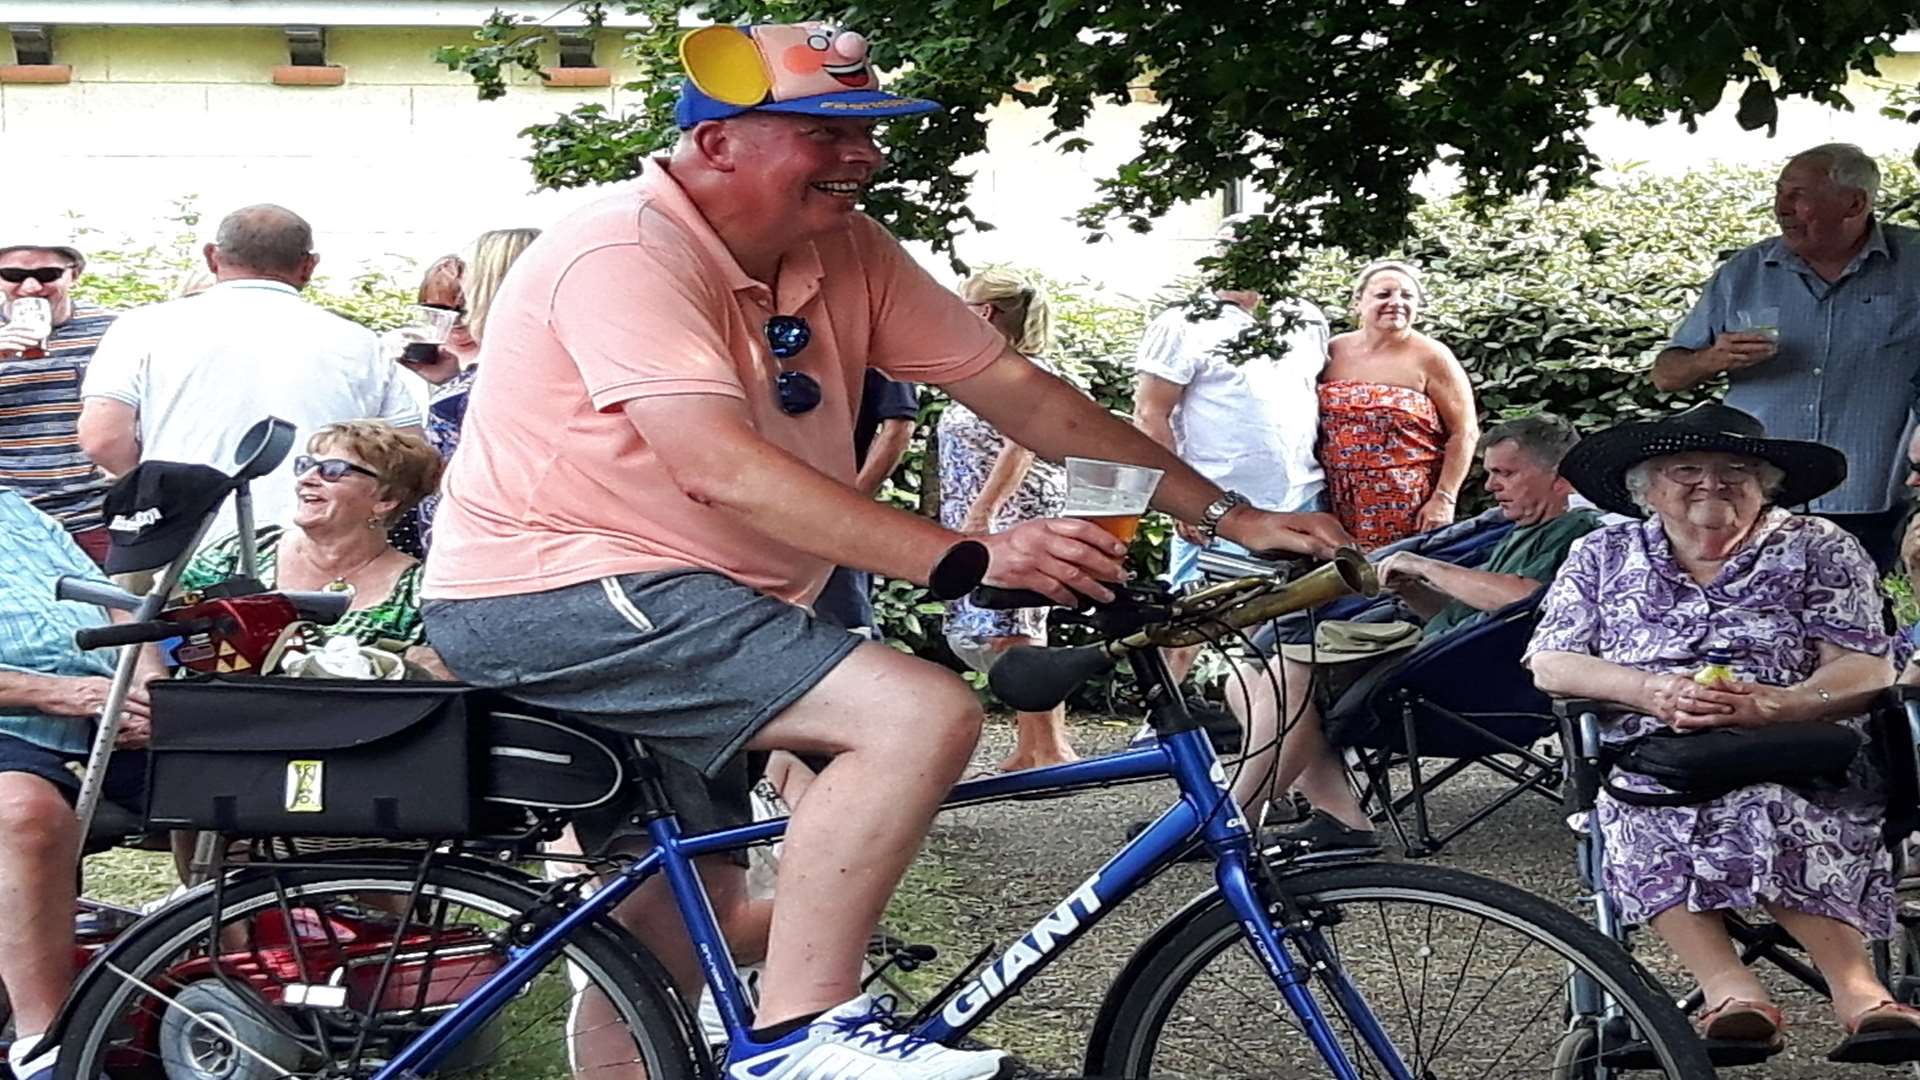 Mad Mike Young of the Monster Raving Loony Party put in an appearance on his beer bike